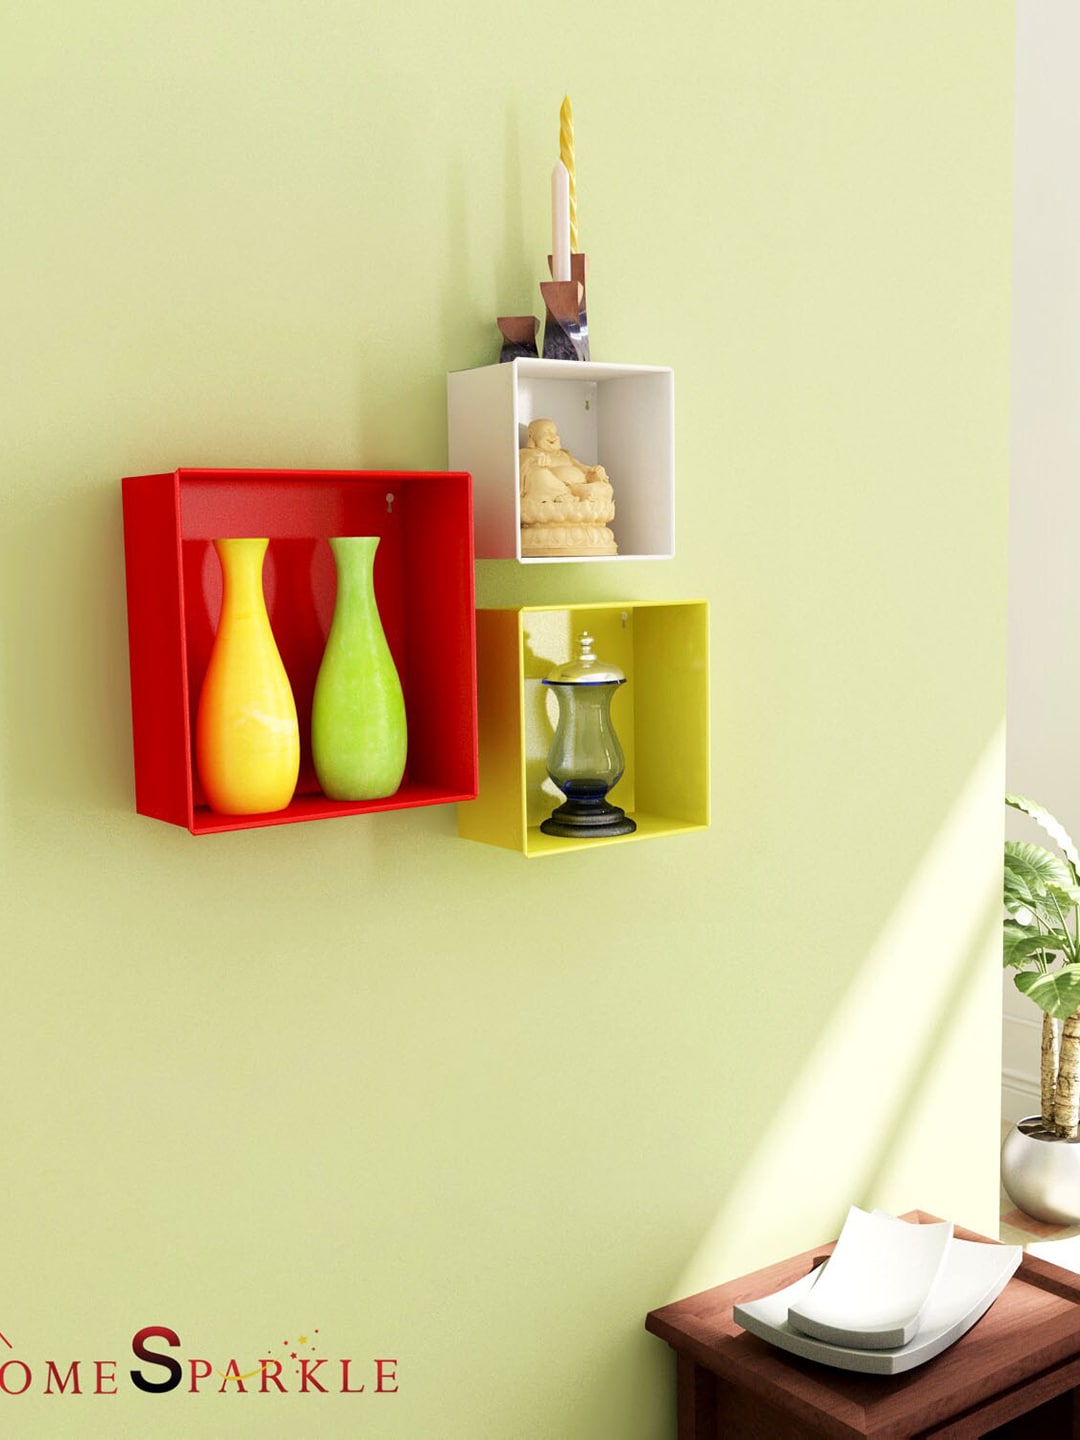 Home Sparkle Pack of 3 Red & Yellow Metal Cube Wall Shelves Price in India